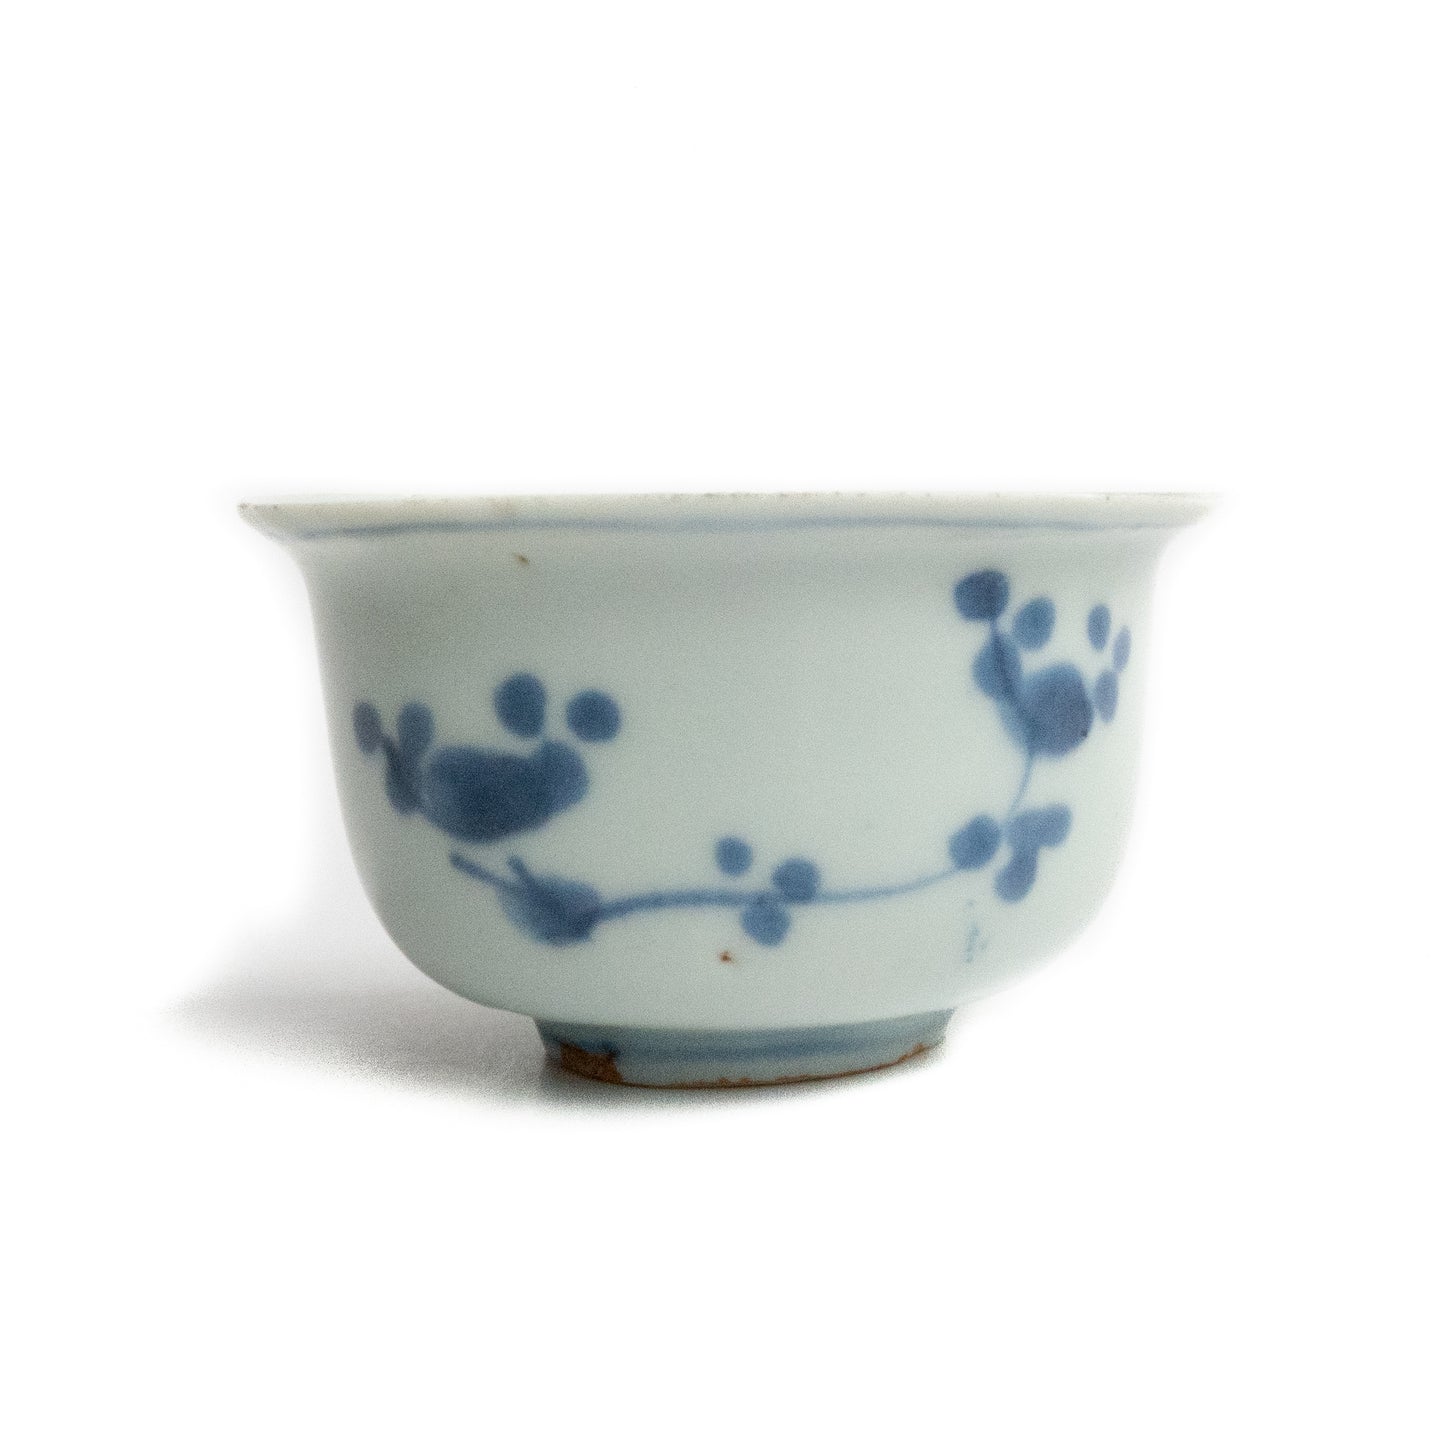 60ml Ming Dynasty Cherry Blossom Cup